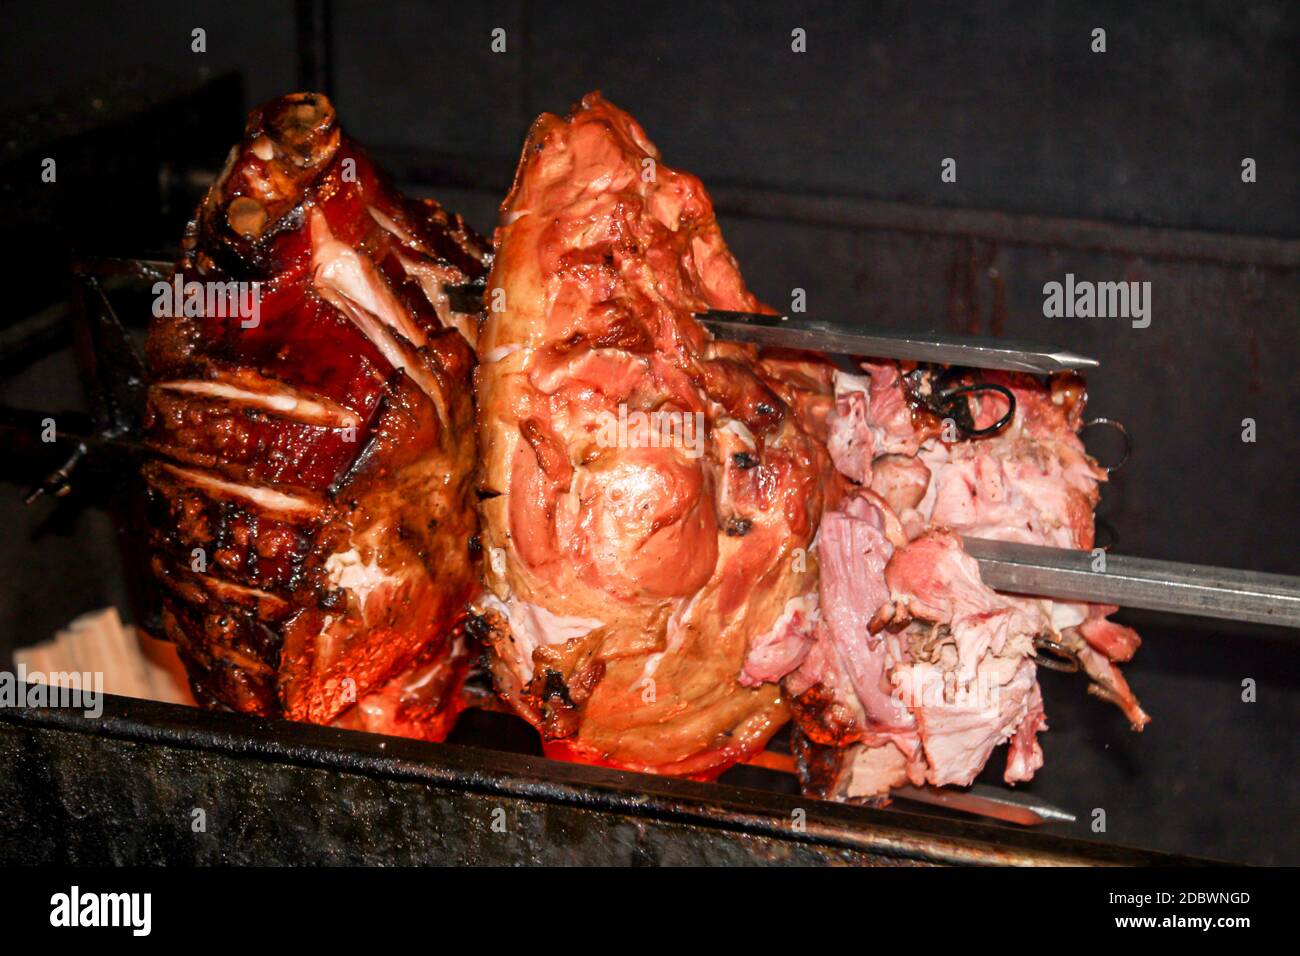 A roast pork on a skewer over a grill Stock Photo